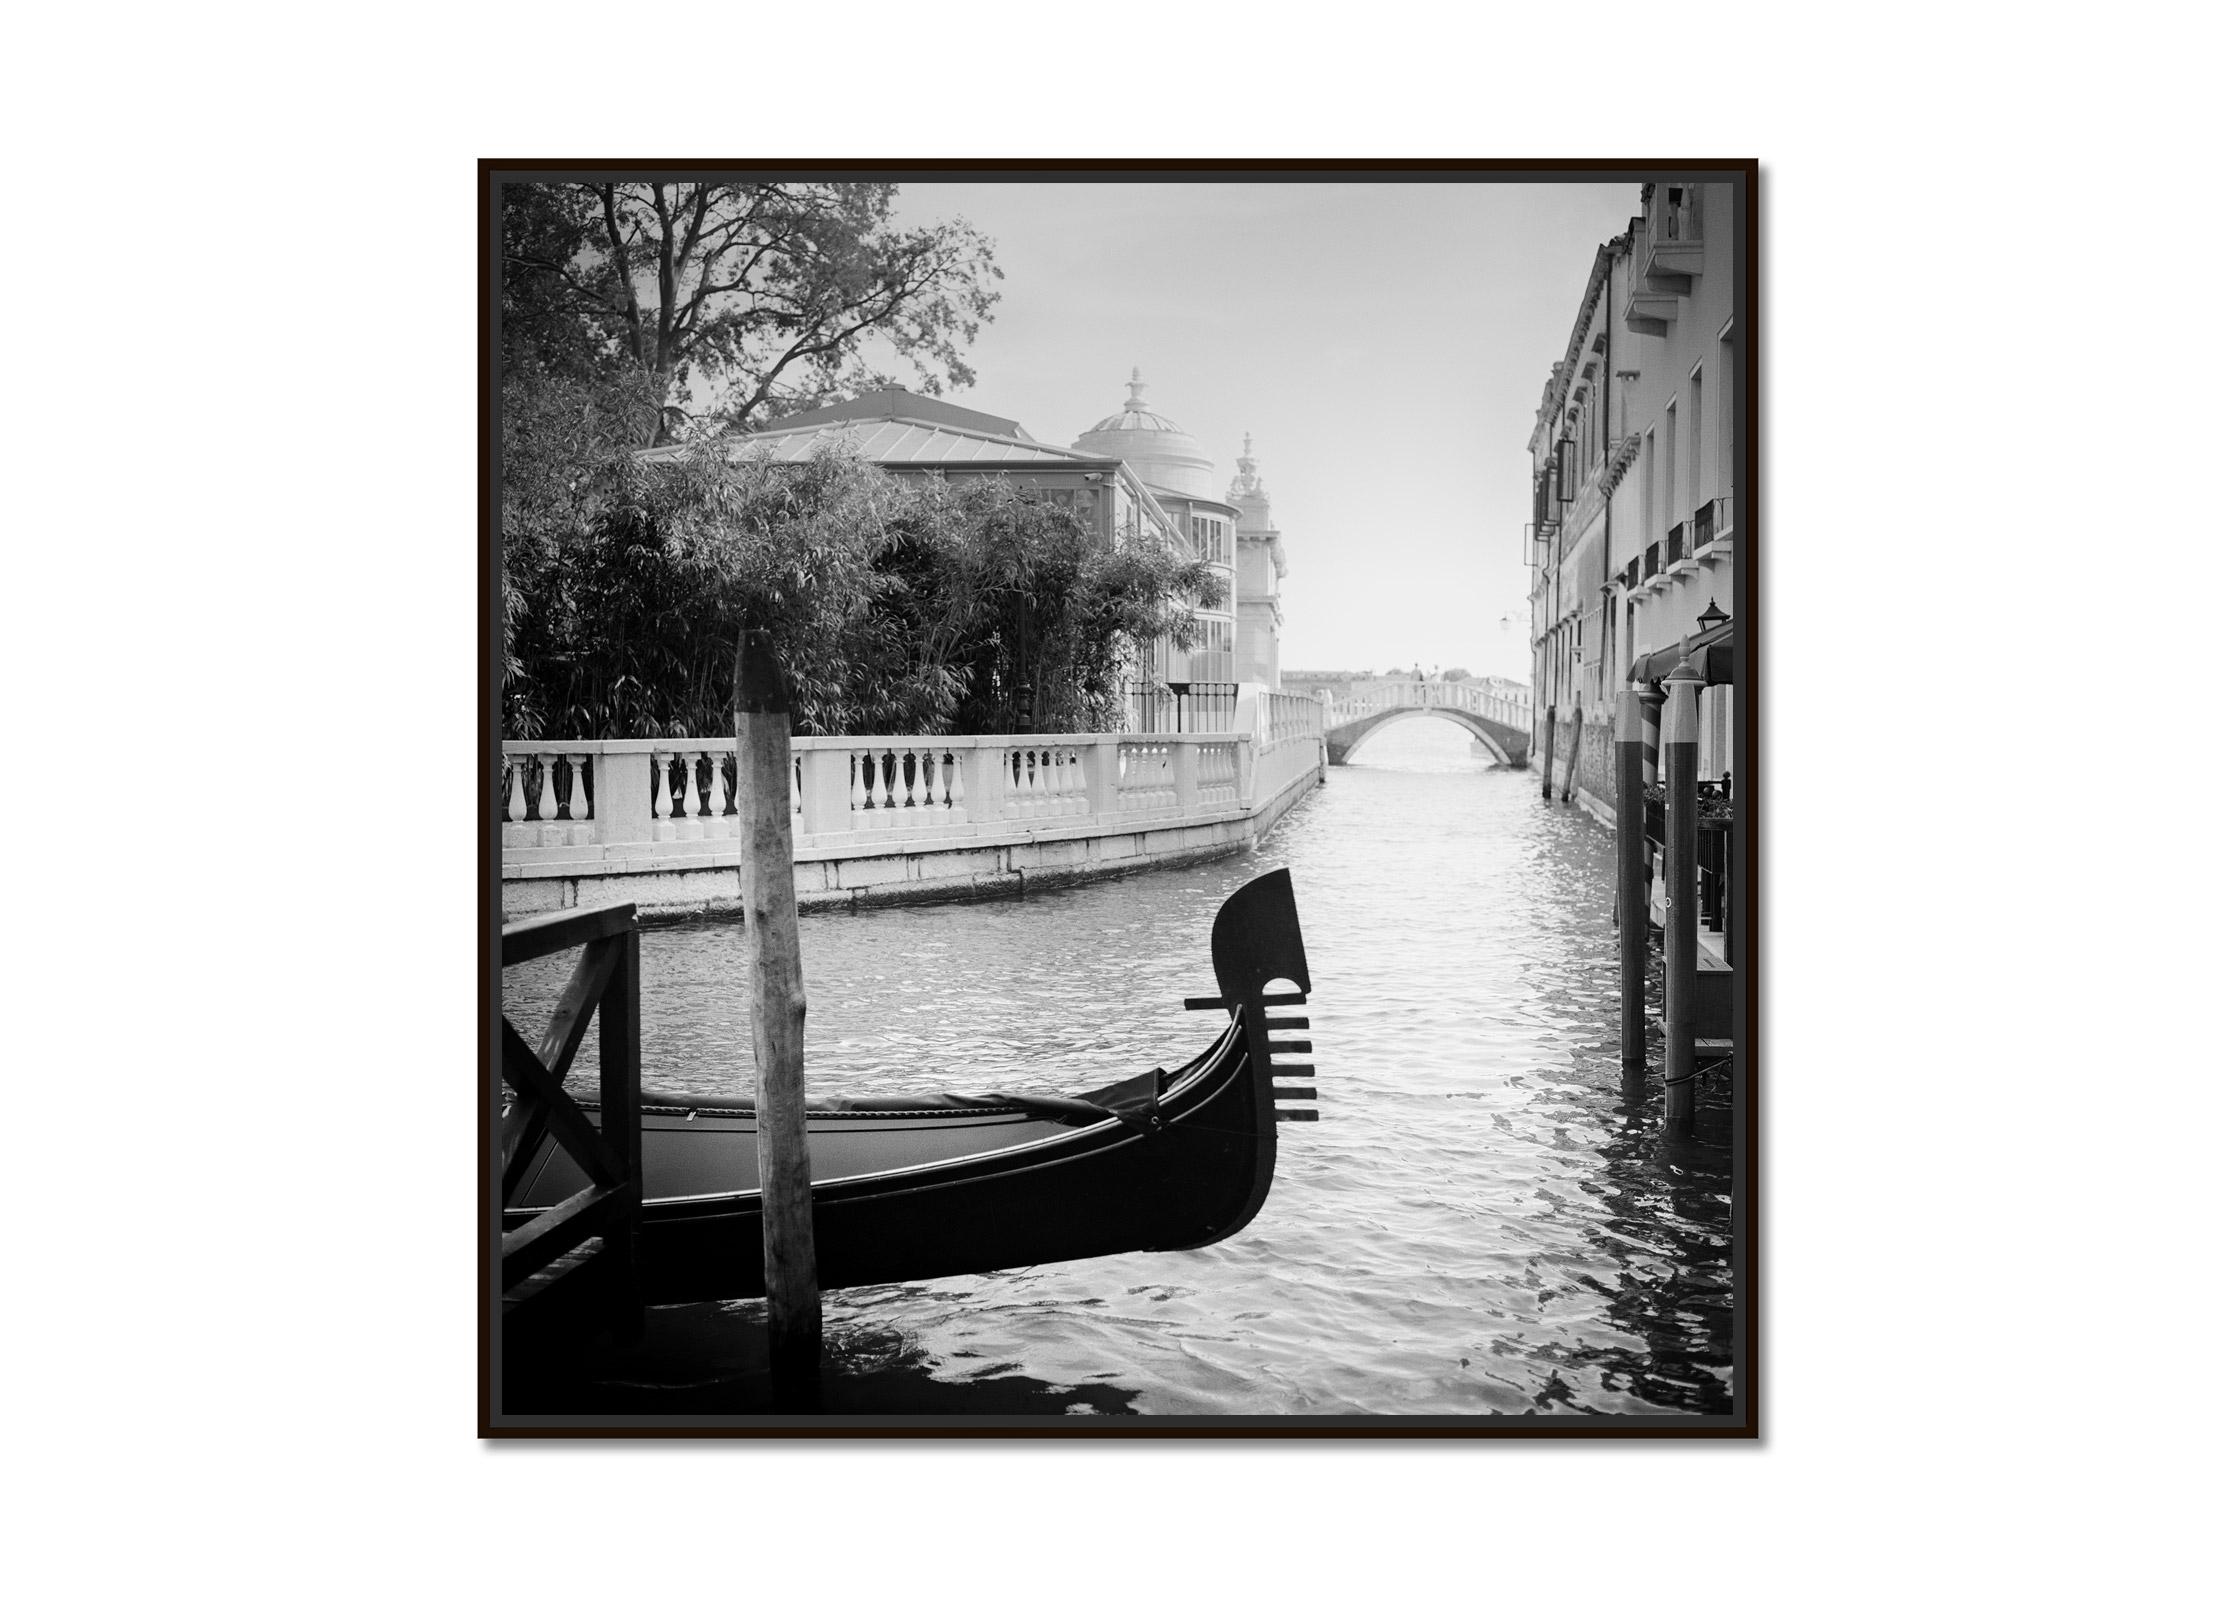 Romance in Venice, Gondoliere, black and white photography, fine art landscape - Photograph by Gerald Berghammer